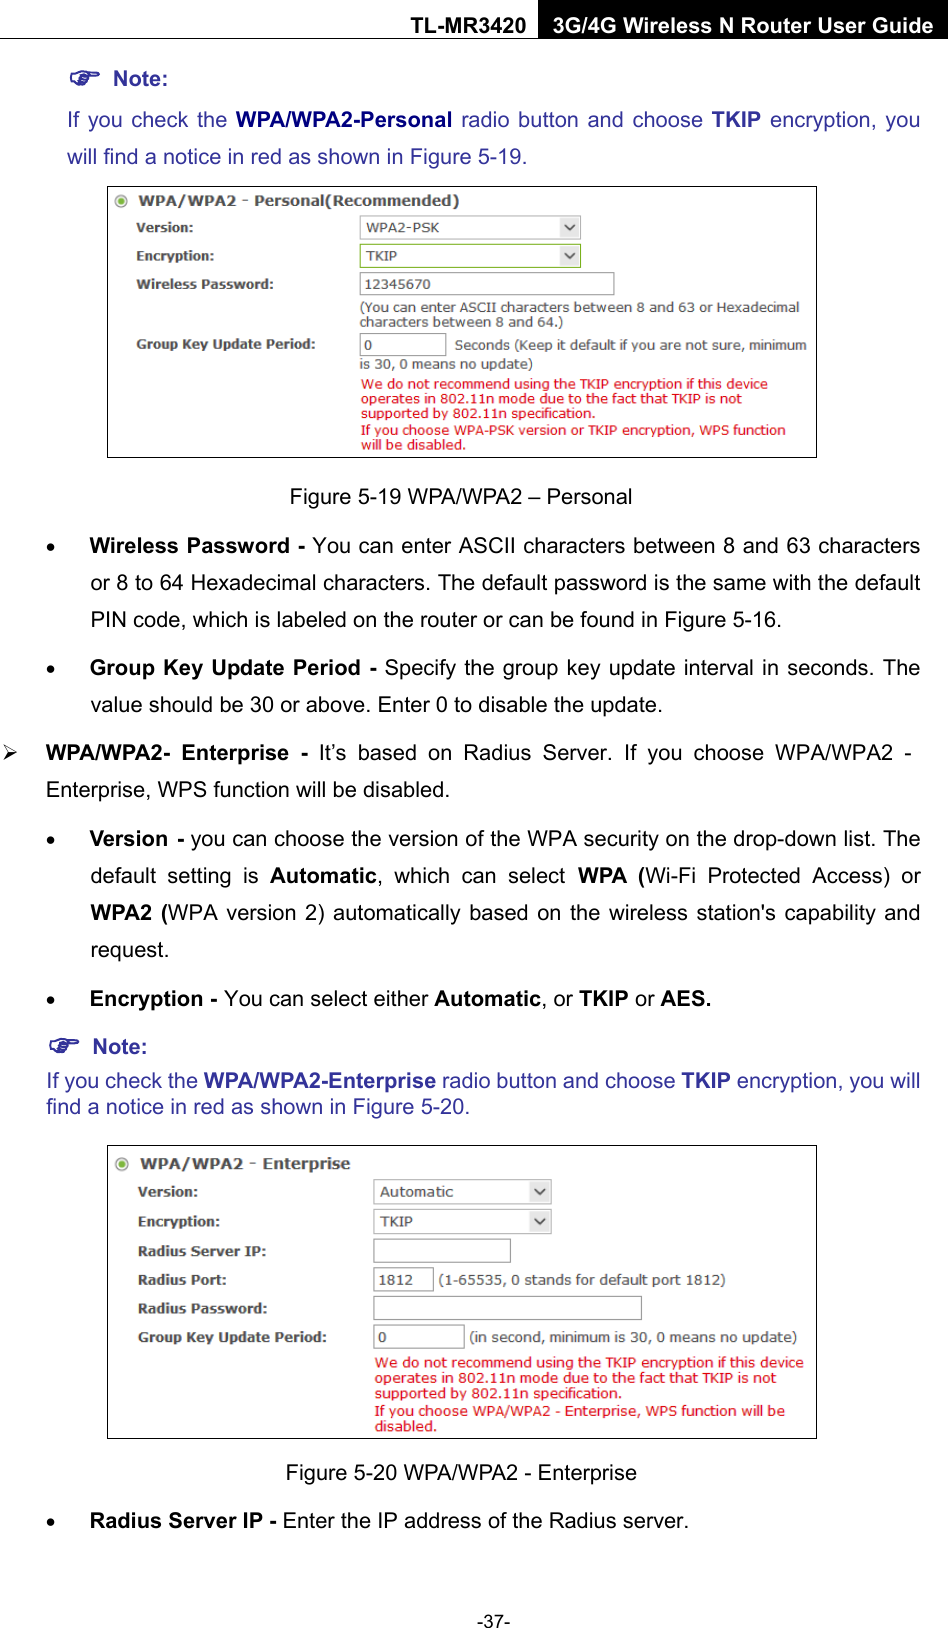    -37- TL-MR3420 3G/4G Wireless N Router User Guide  Note:   If you check the WPA/WPA2-Personal radio button and choose TKIP encryption, you will find a notice in red as shown in Figure 5-19.  Figure 5-19 WPA/WPA2 – Personal • Wireless Password - You can enter ASCII characters between 8 and 63 characters or 8 to 64 Hexadecimal characters. The default password is the same with the default PIN code, which is labeled on the router or can be found in Figure 5-16. • Group Key Update Period - Specify the group key update interval in seconds. The value should be 30 or above. Enter 0 to disable the update.  WPA/WPA2-  Enterprise  - It’s based on Radius Server. If you choose WPA/WPA2 - Enterprise, WPS function will be disabled. • Version - you can choose the version of the WPA security on the drop-down list. The default setting is Automatic, which can select WPA (Wi-Fi Protected Access) or WPA2 (WPA version 2) automatically based on the wireless station&apos;s capability and request. • Encryption - You can select either Automatic, or TKIP or AES.  Note: If you check the WPA/WPA2-Enterprise radio button and choose TKIP encryption, you will find a notice in red as shown in Figure 5-20.  Figure 5-20 WPA/WPA2 - Enterprise • Radius Server IP - Enter the IP address of the Radius server. 